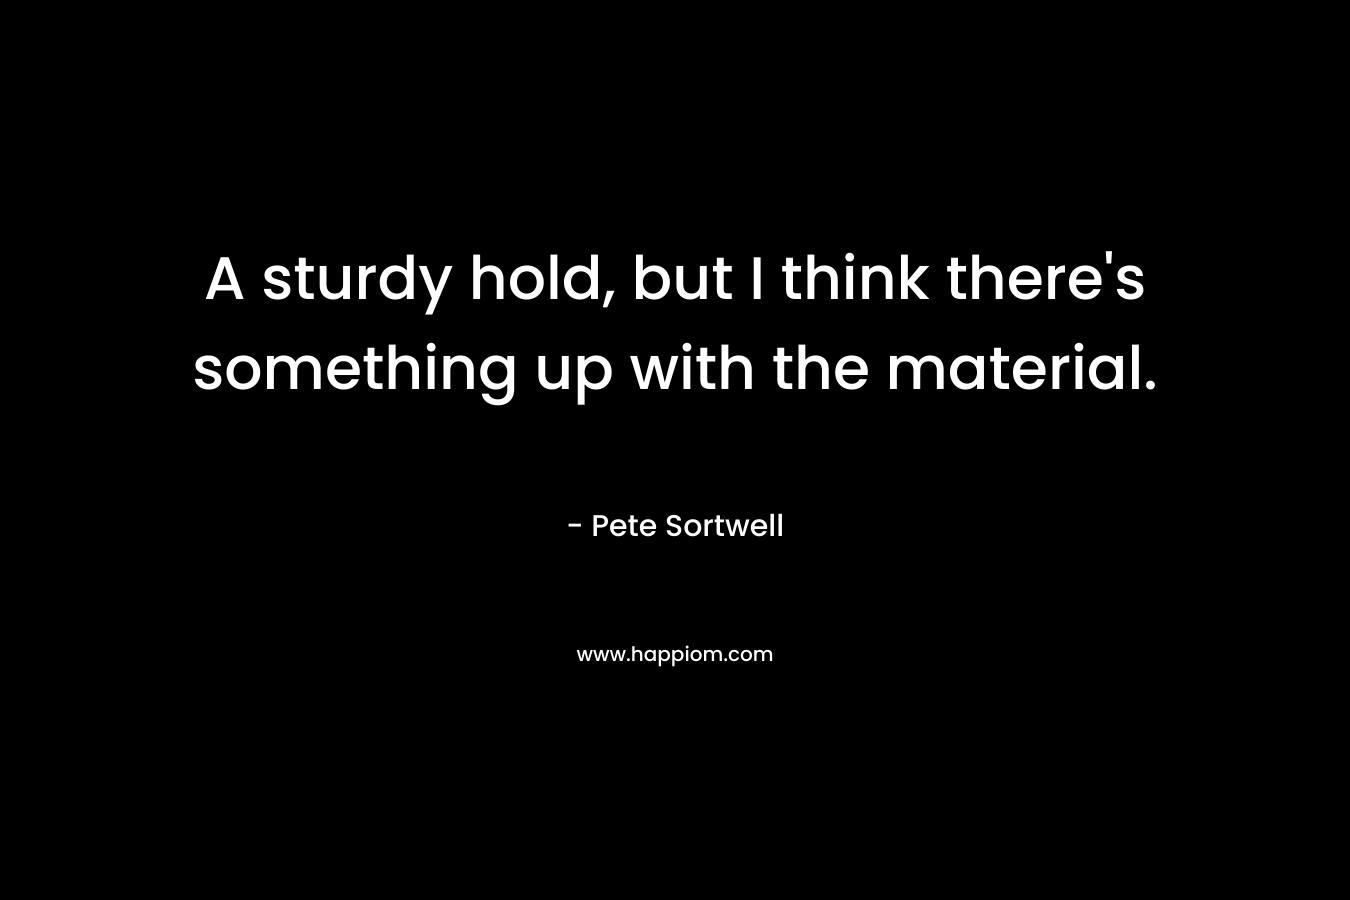 A sturdy hold, but I think there’s something up with the material. – Pete Sortwell